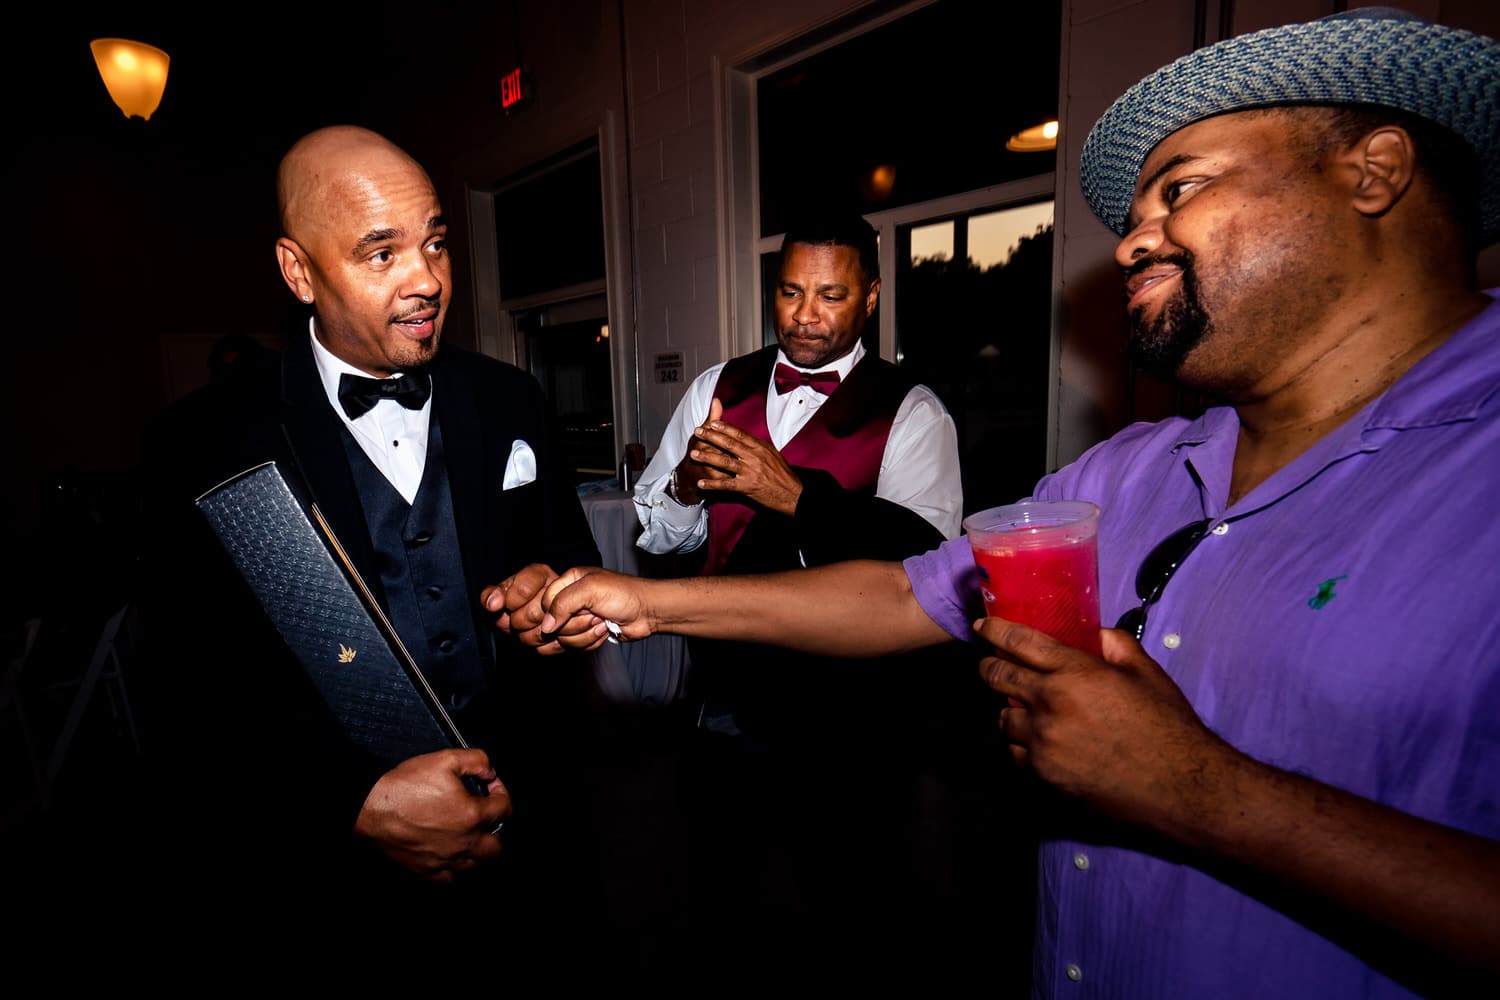 A colorful, candid picture of a groom receiving a wedding gift from a wedding guest. 